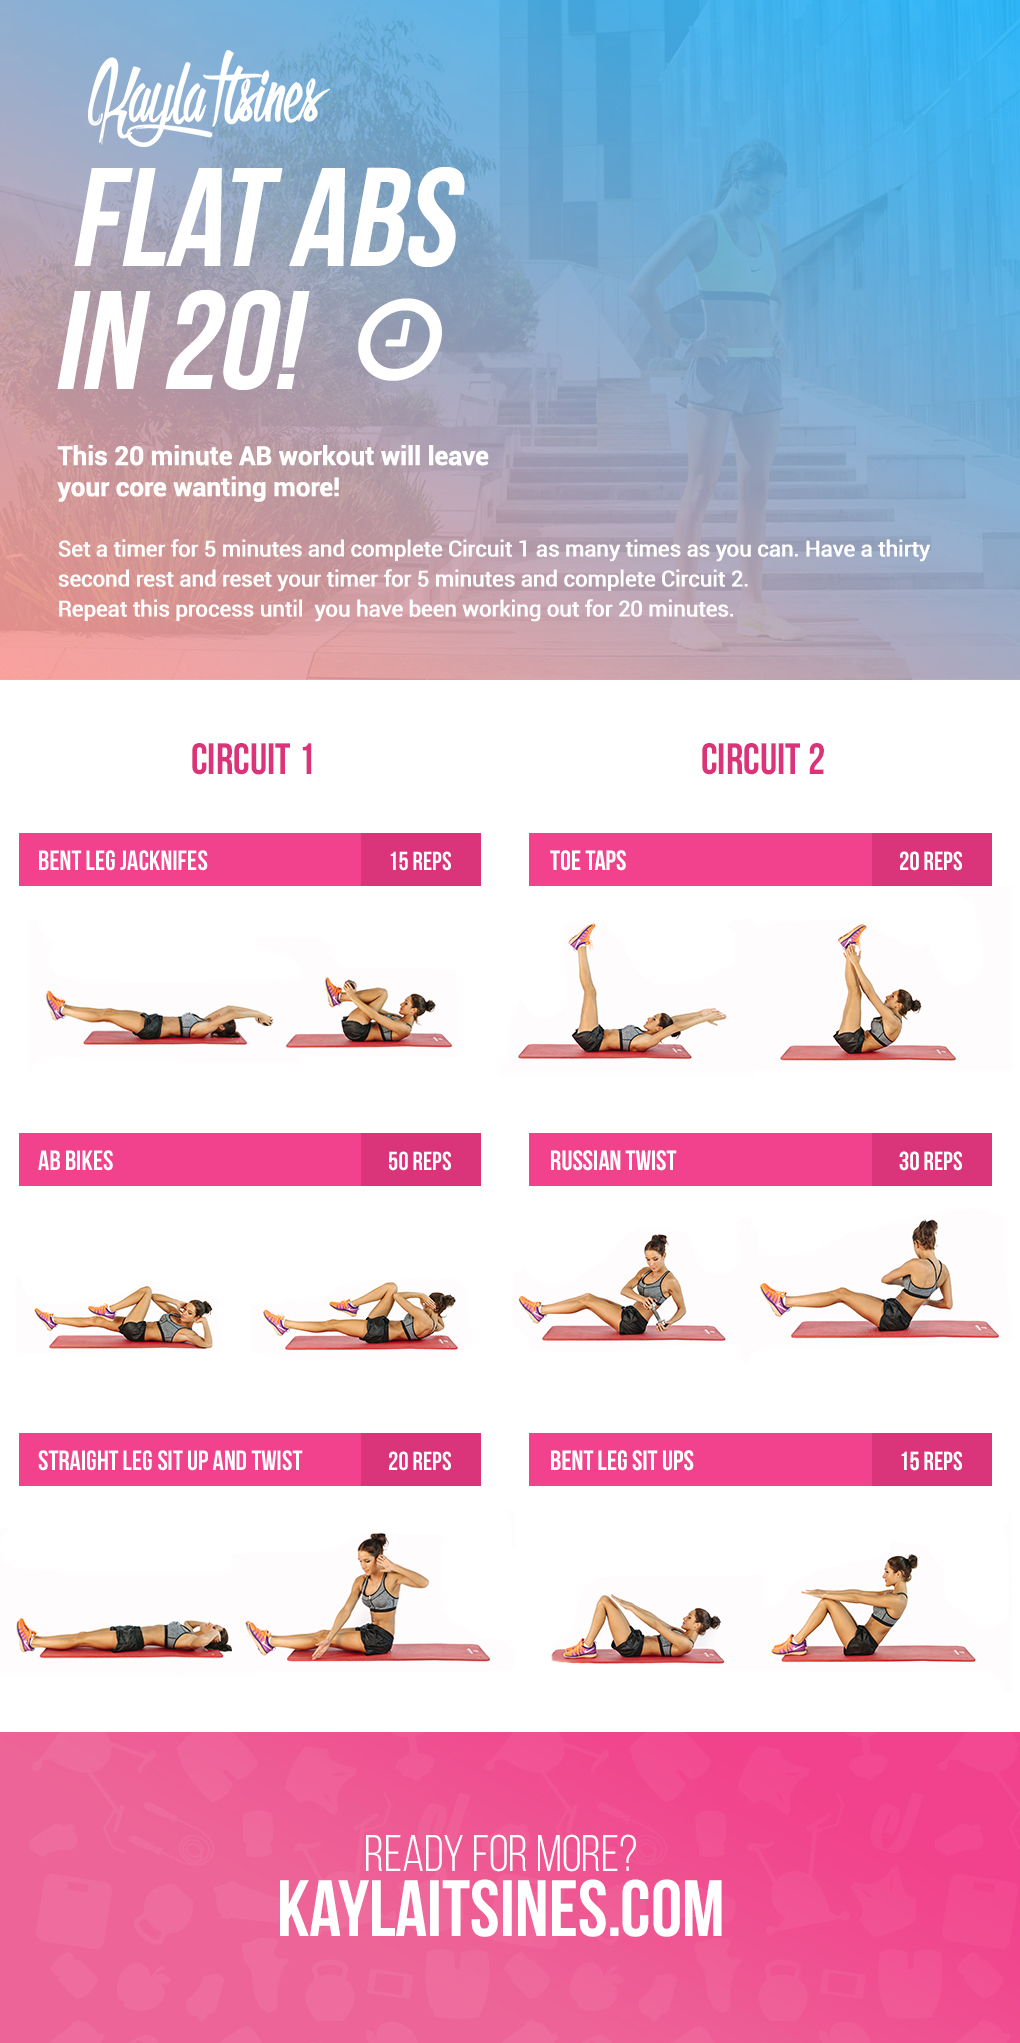 10 Insane 20 Minute Ab Workouts That Will Help You Say Bye To Belly Fat ...